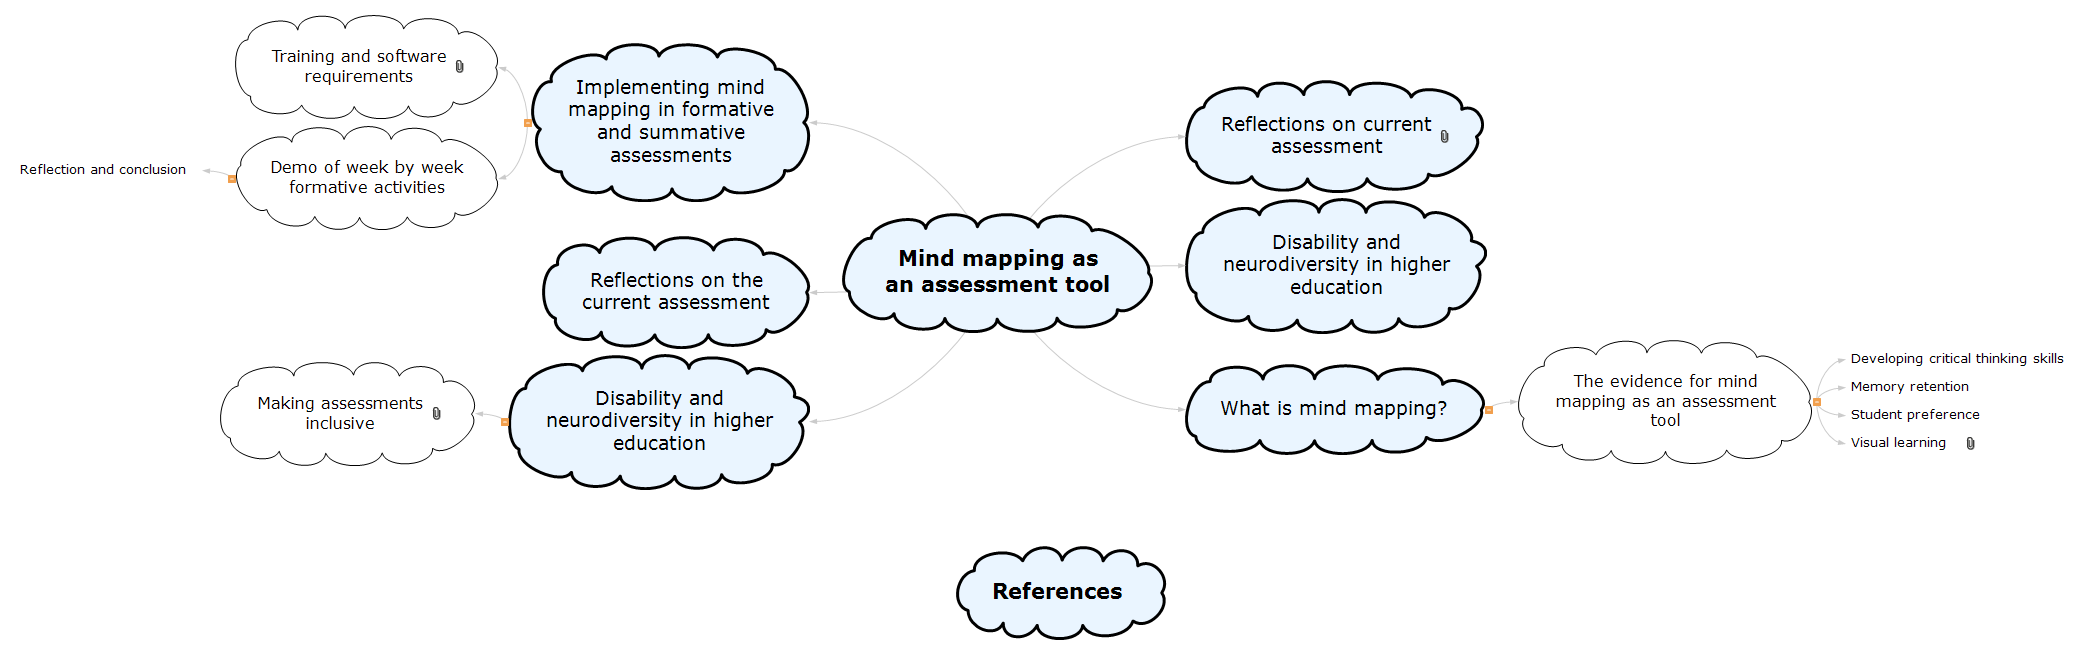 Mind mapping as an assessment tool Mind Map